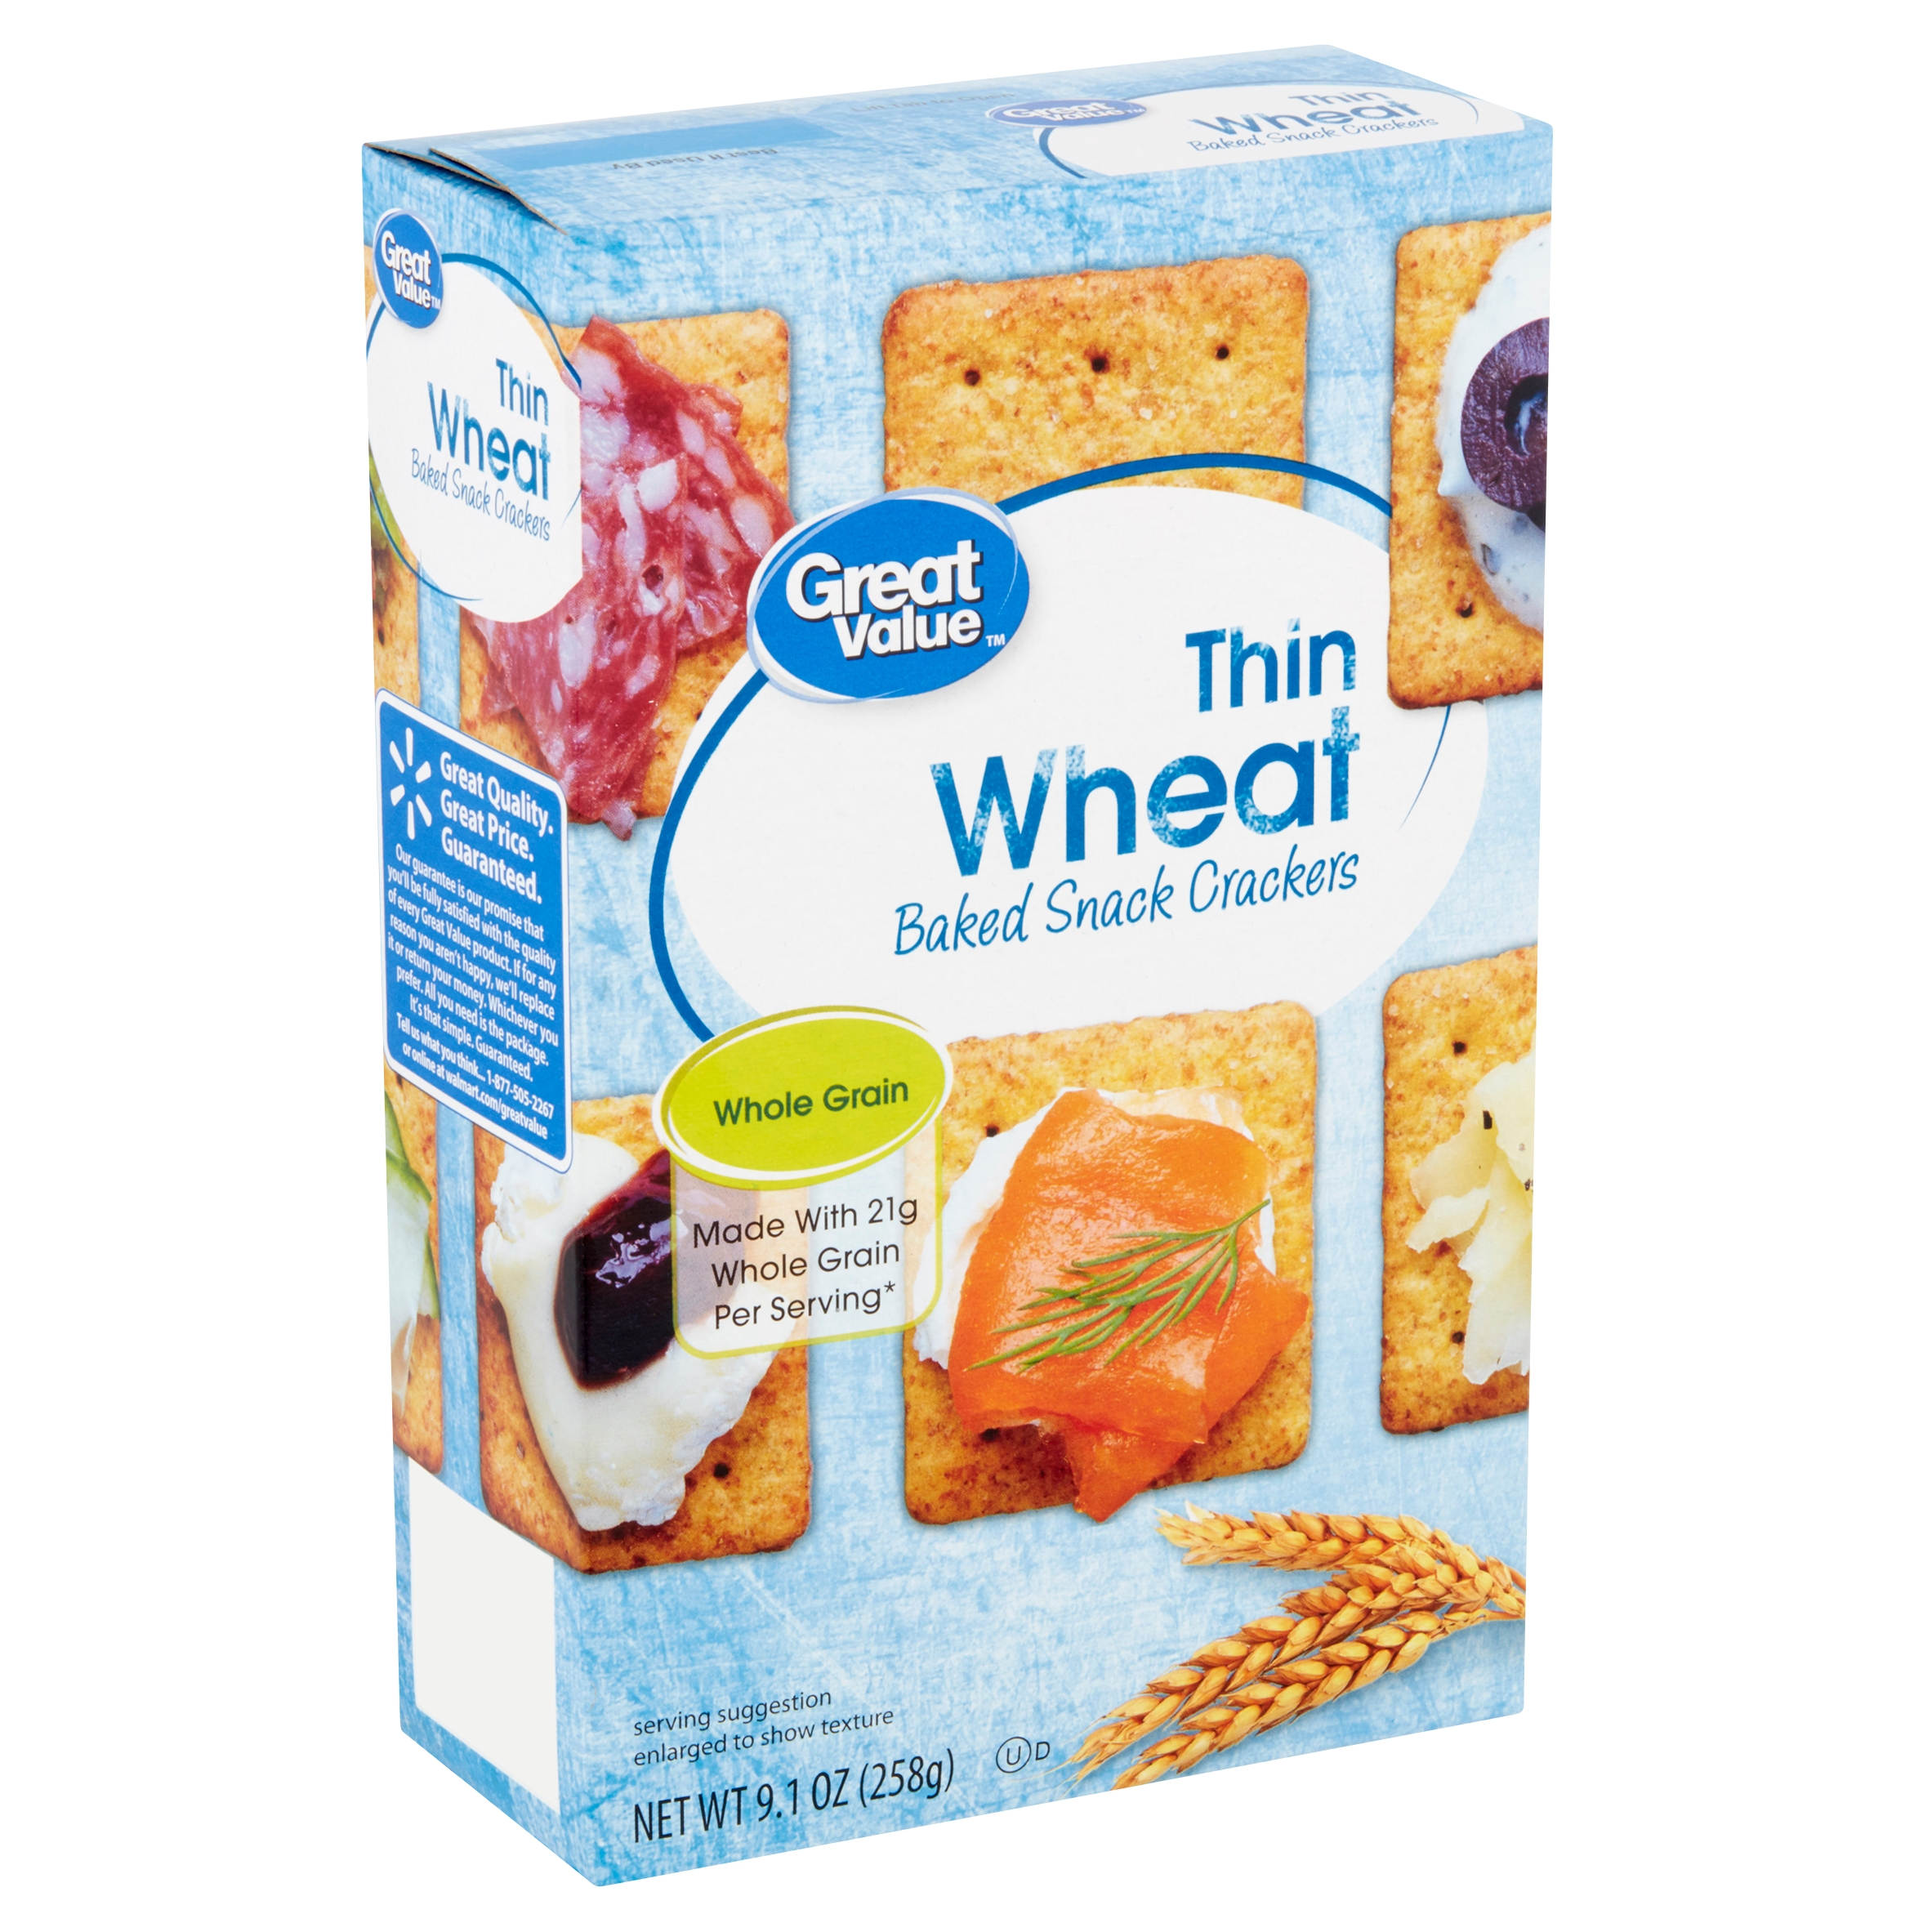 Great Value Thin Wheat Baked Snack Crackers, 9.1 Oz Image